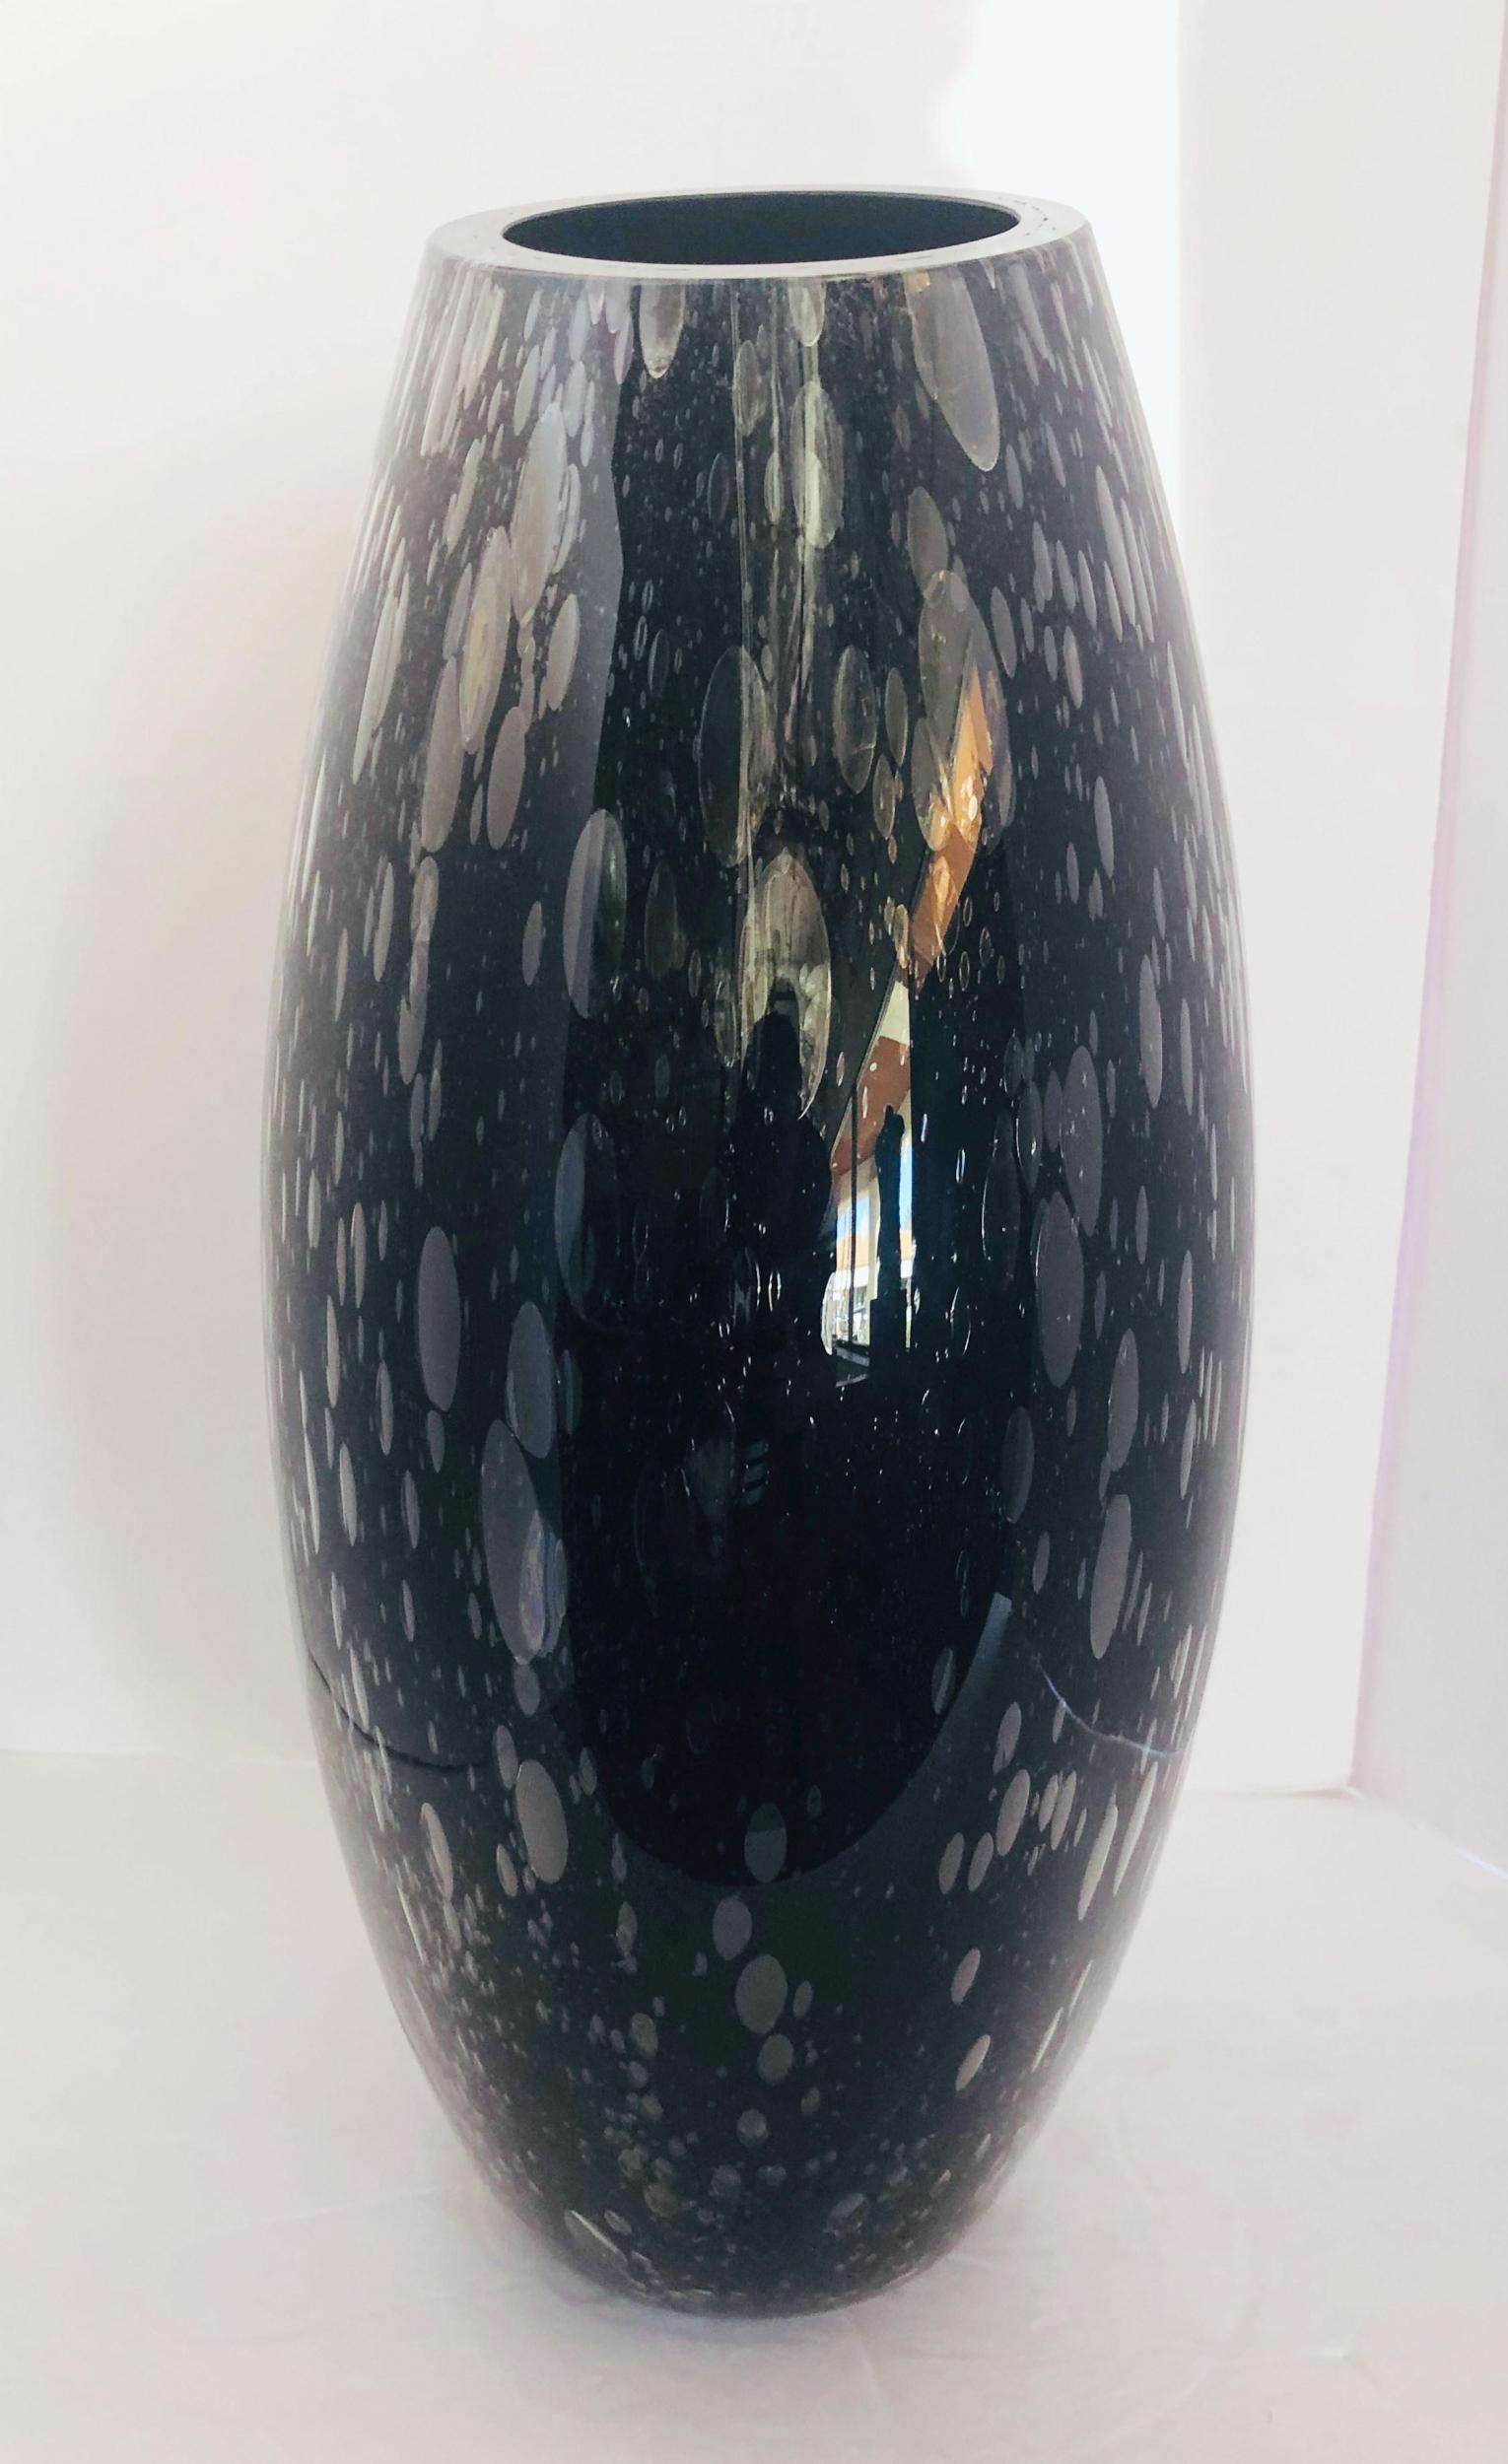 Two Signed Italian Vases w/ Black Murano Glass by Alberto Donà, 1980s For Sale 4